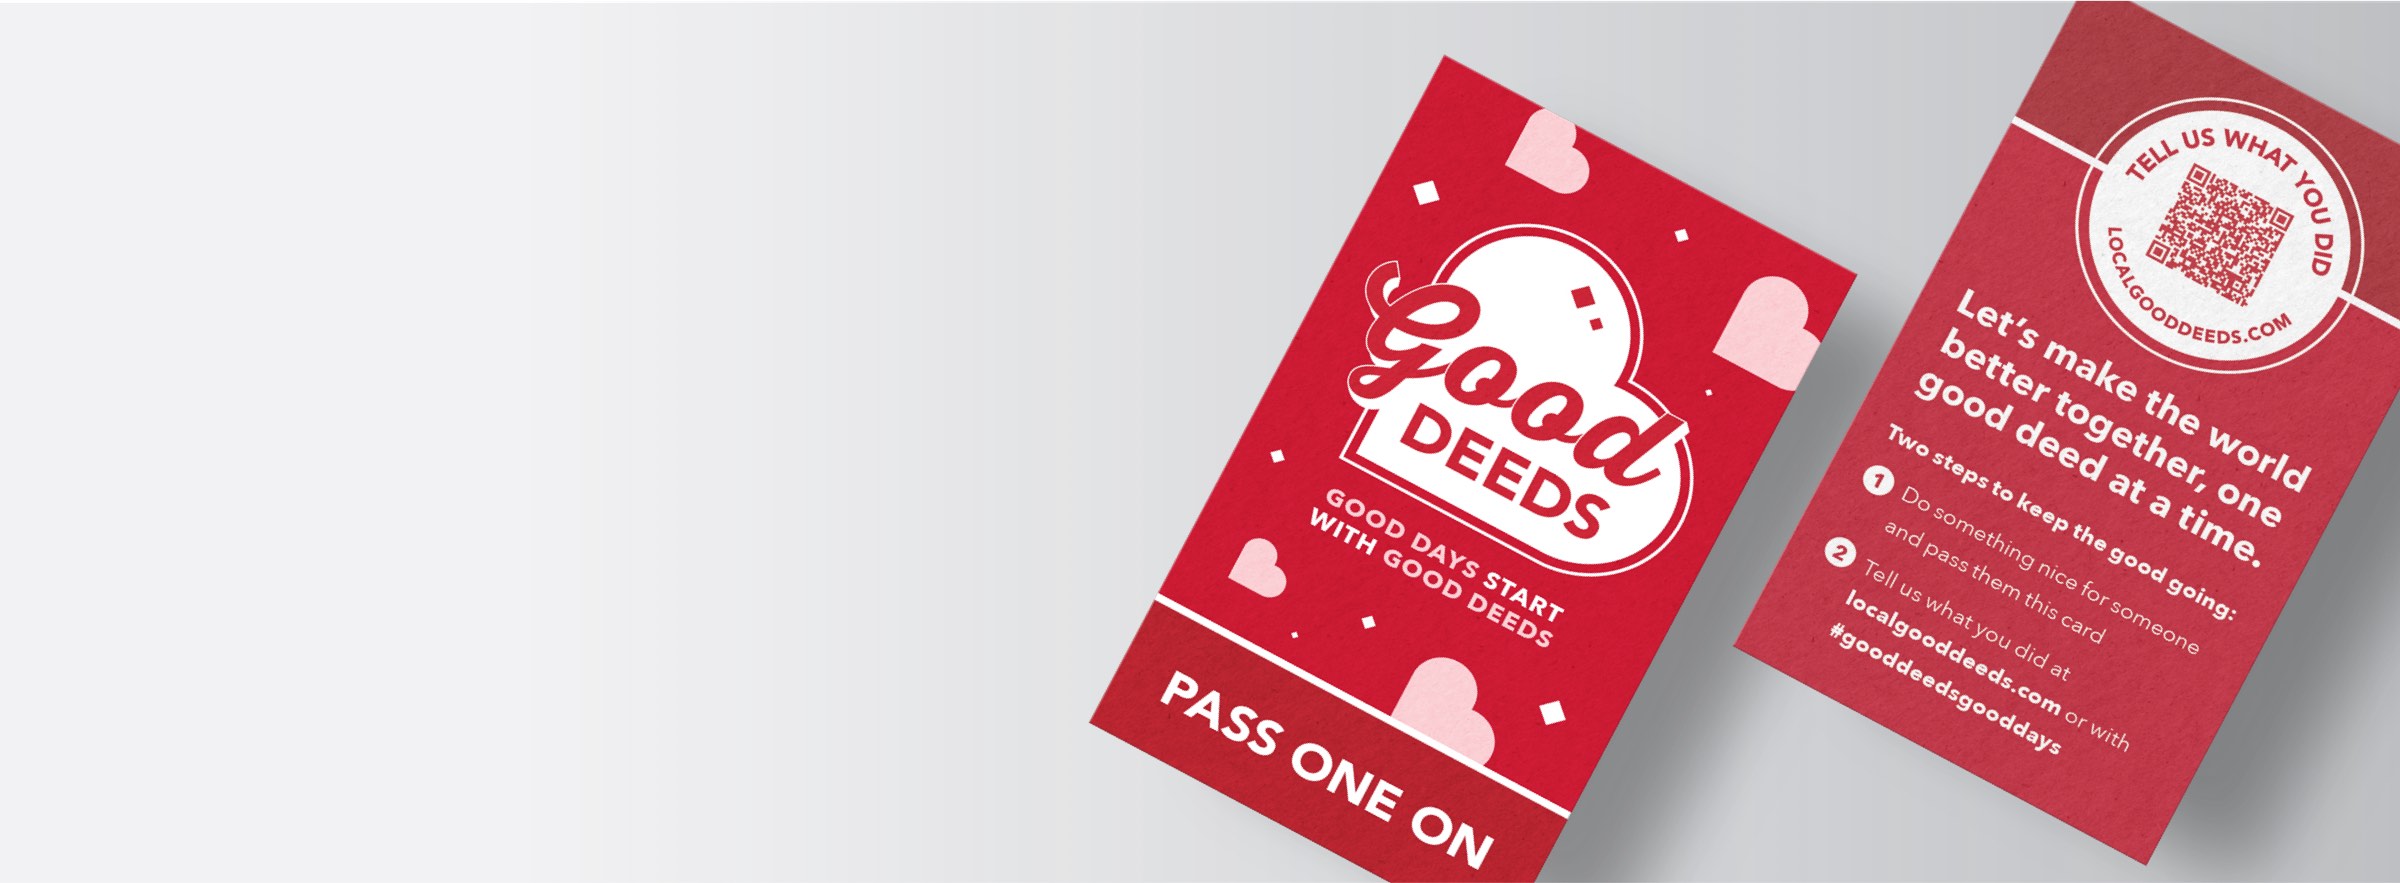 Good Deeds card front and back.